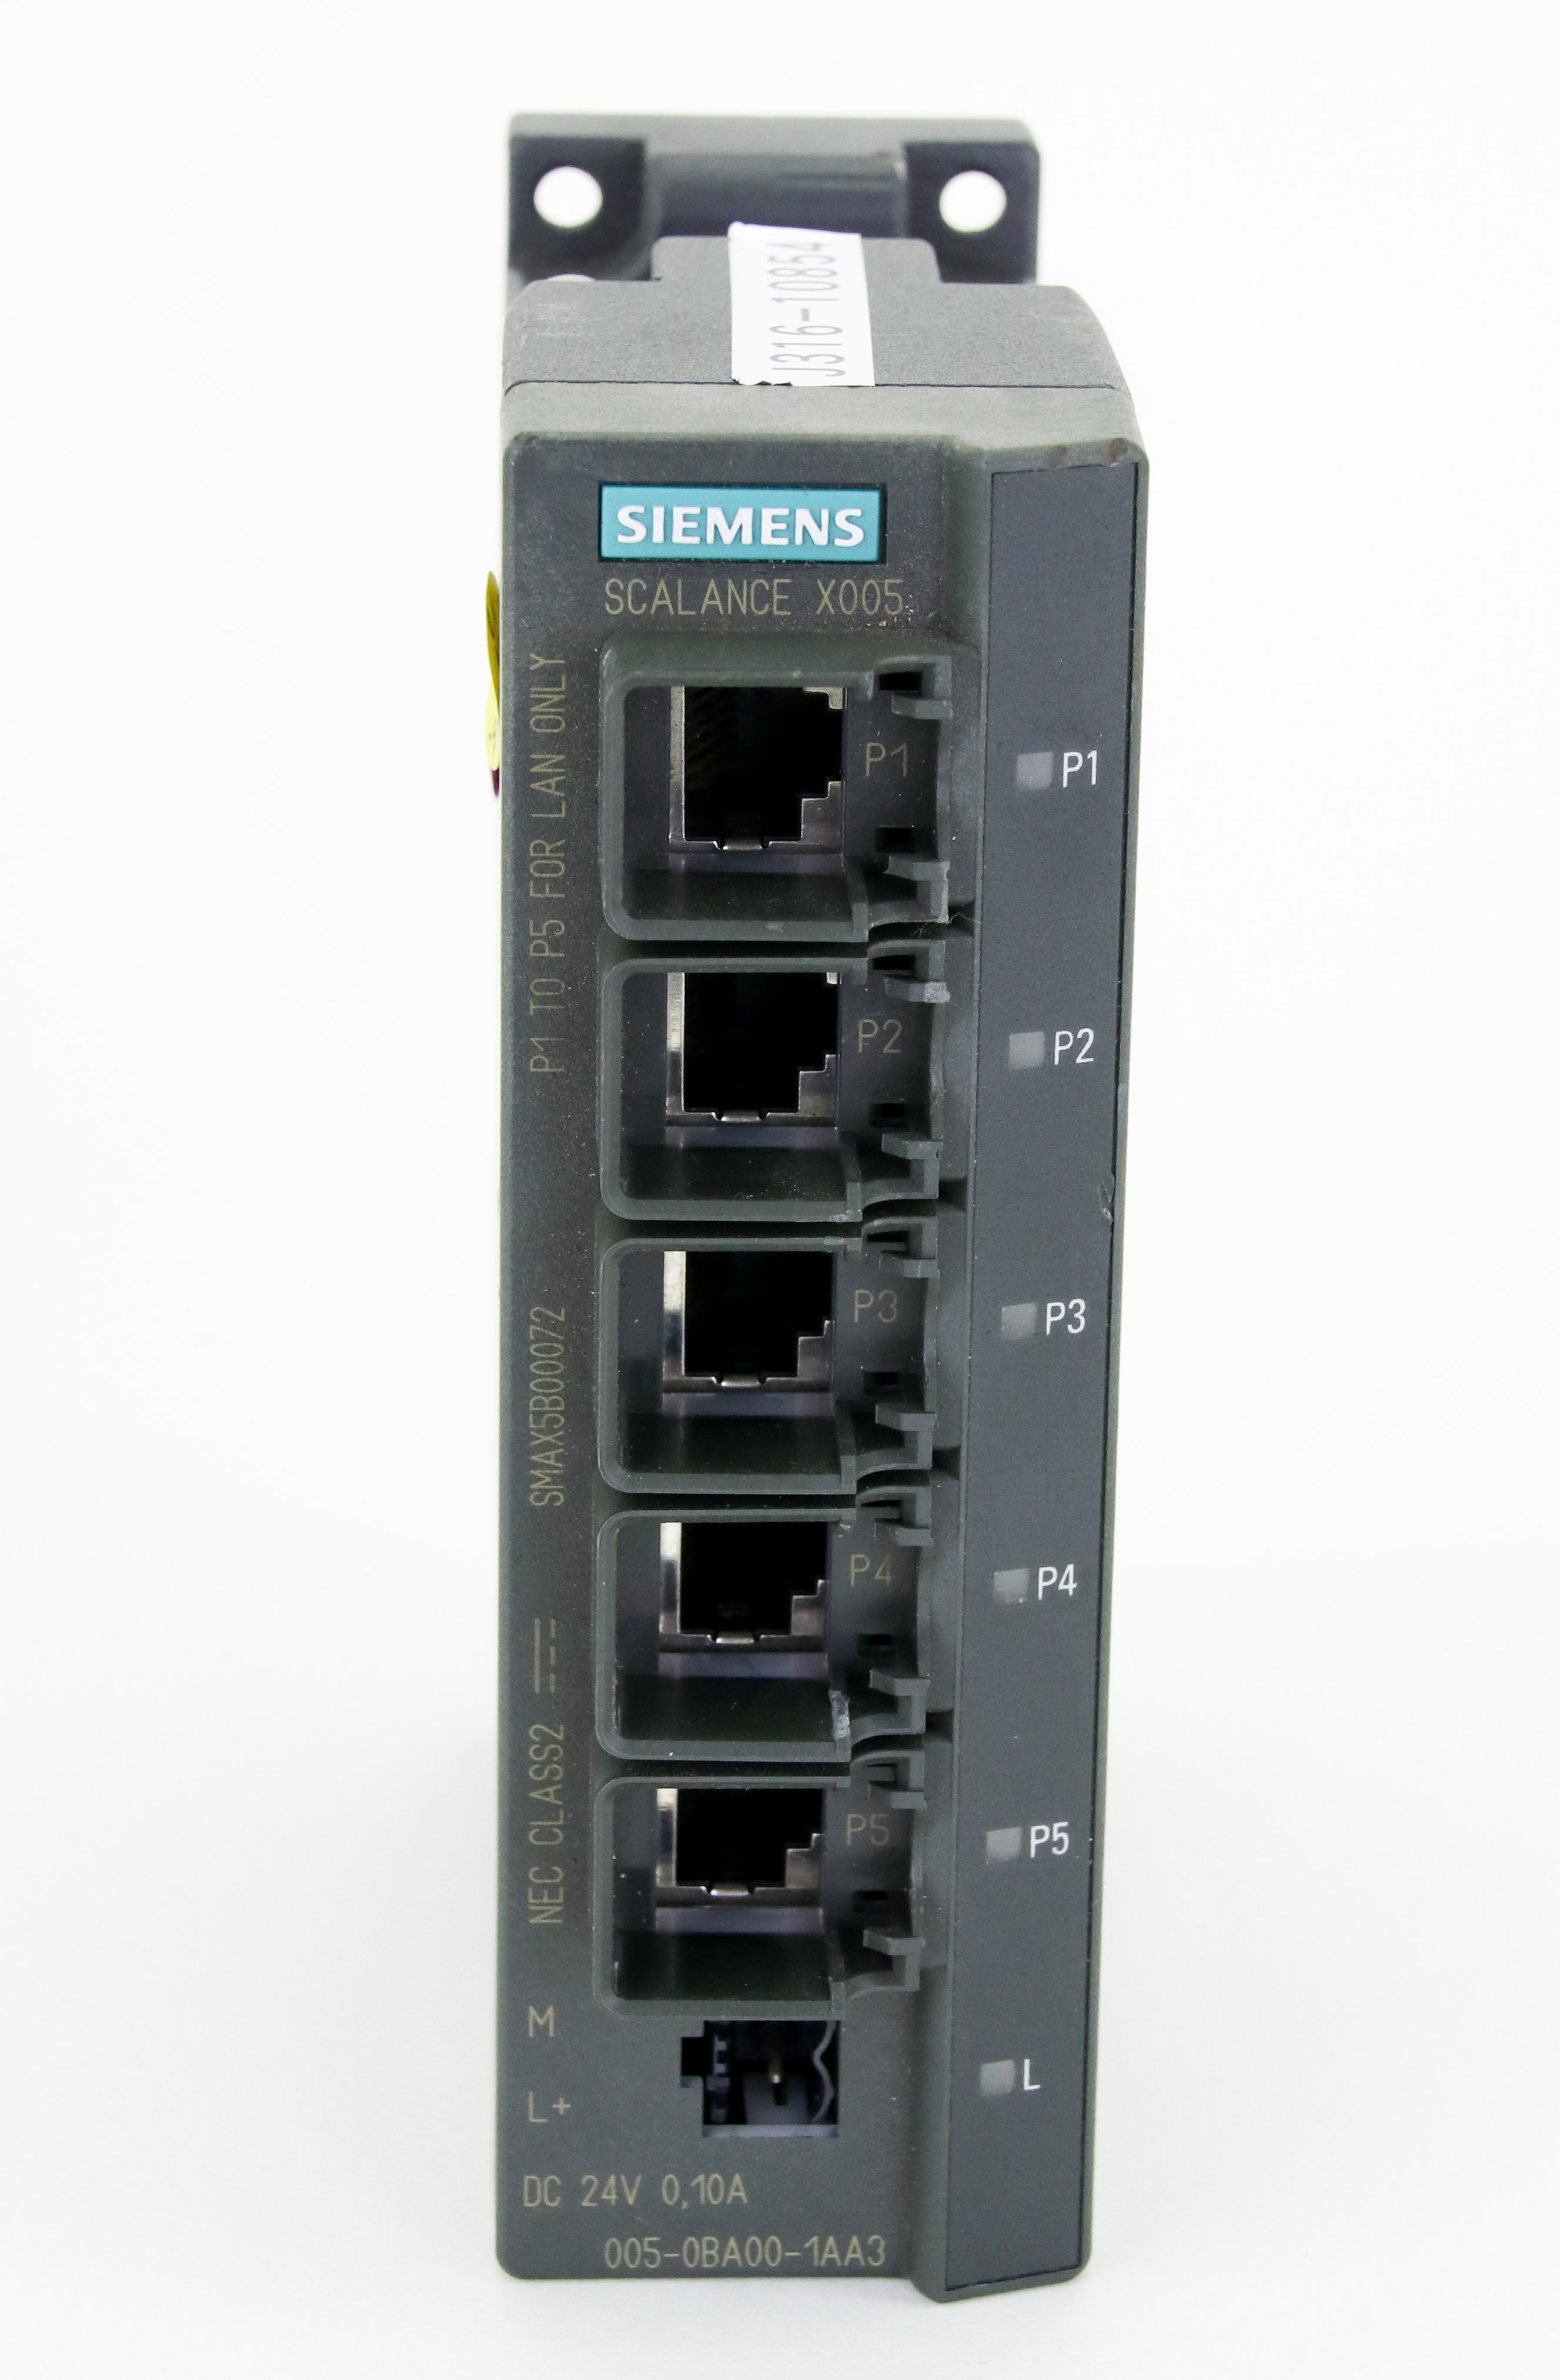 Siemens 6GK59911AD008AA0 Scalance for sale online